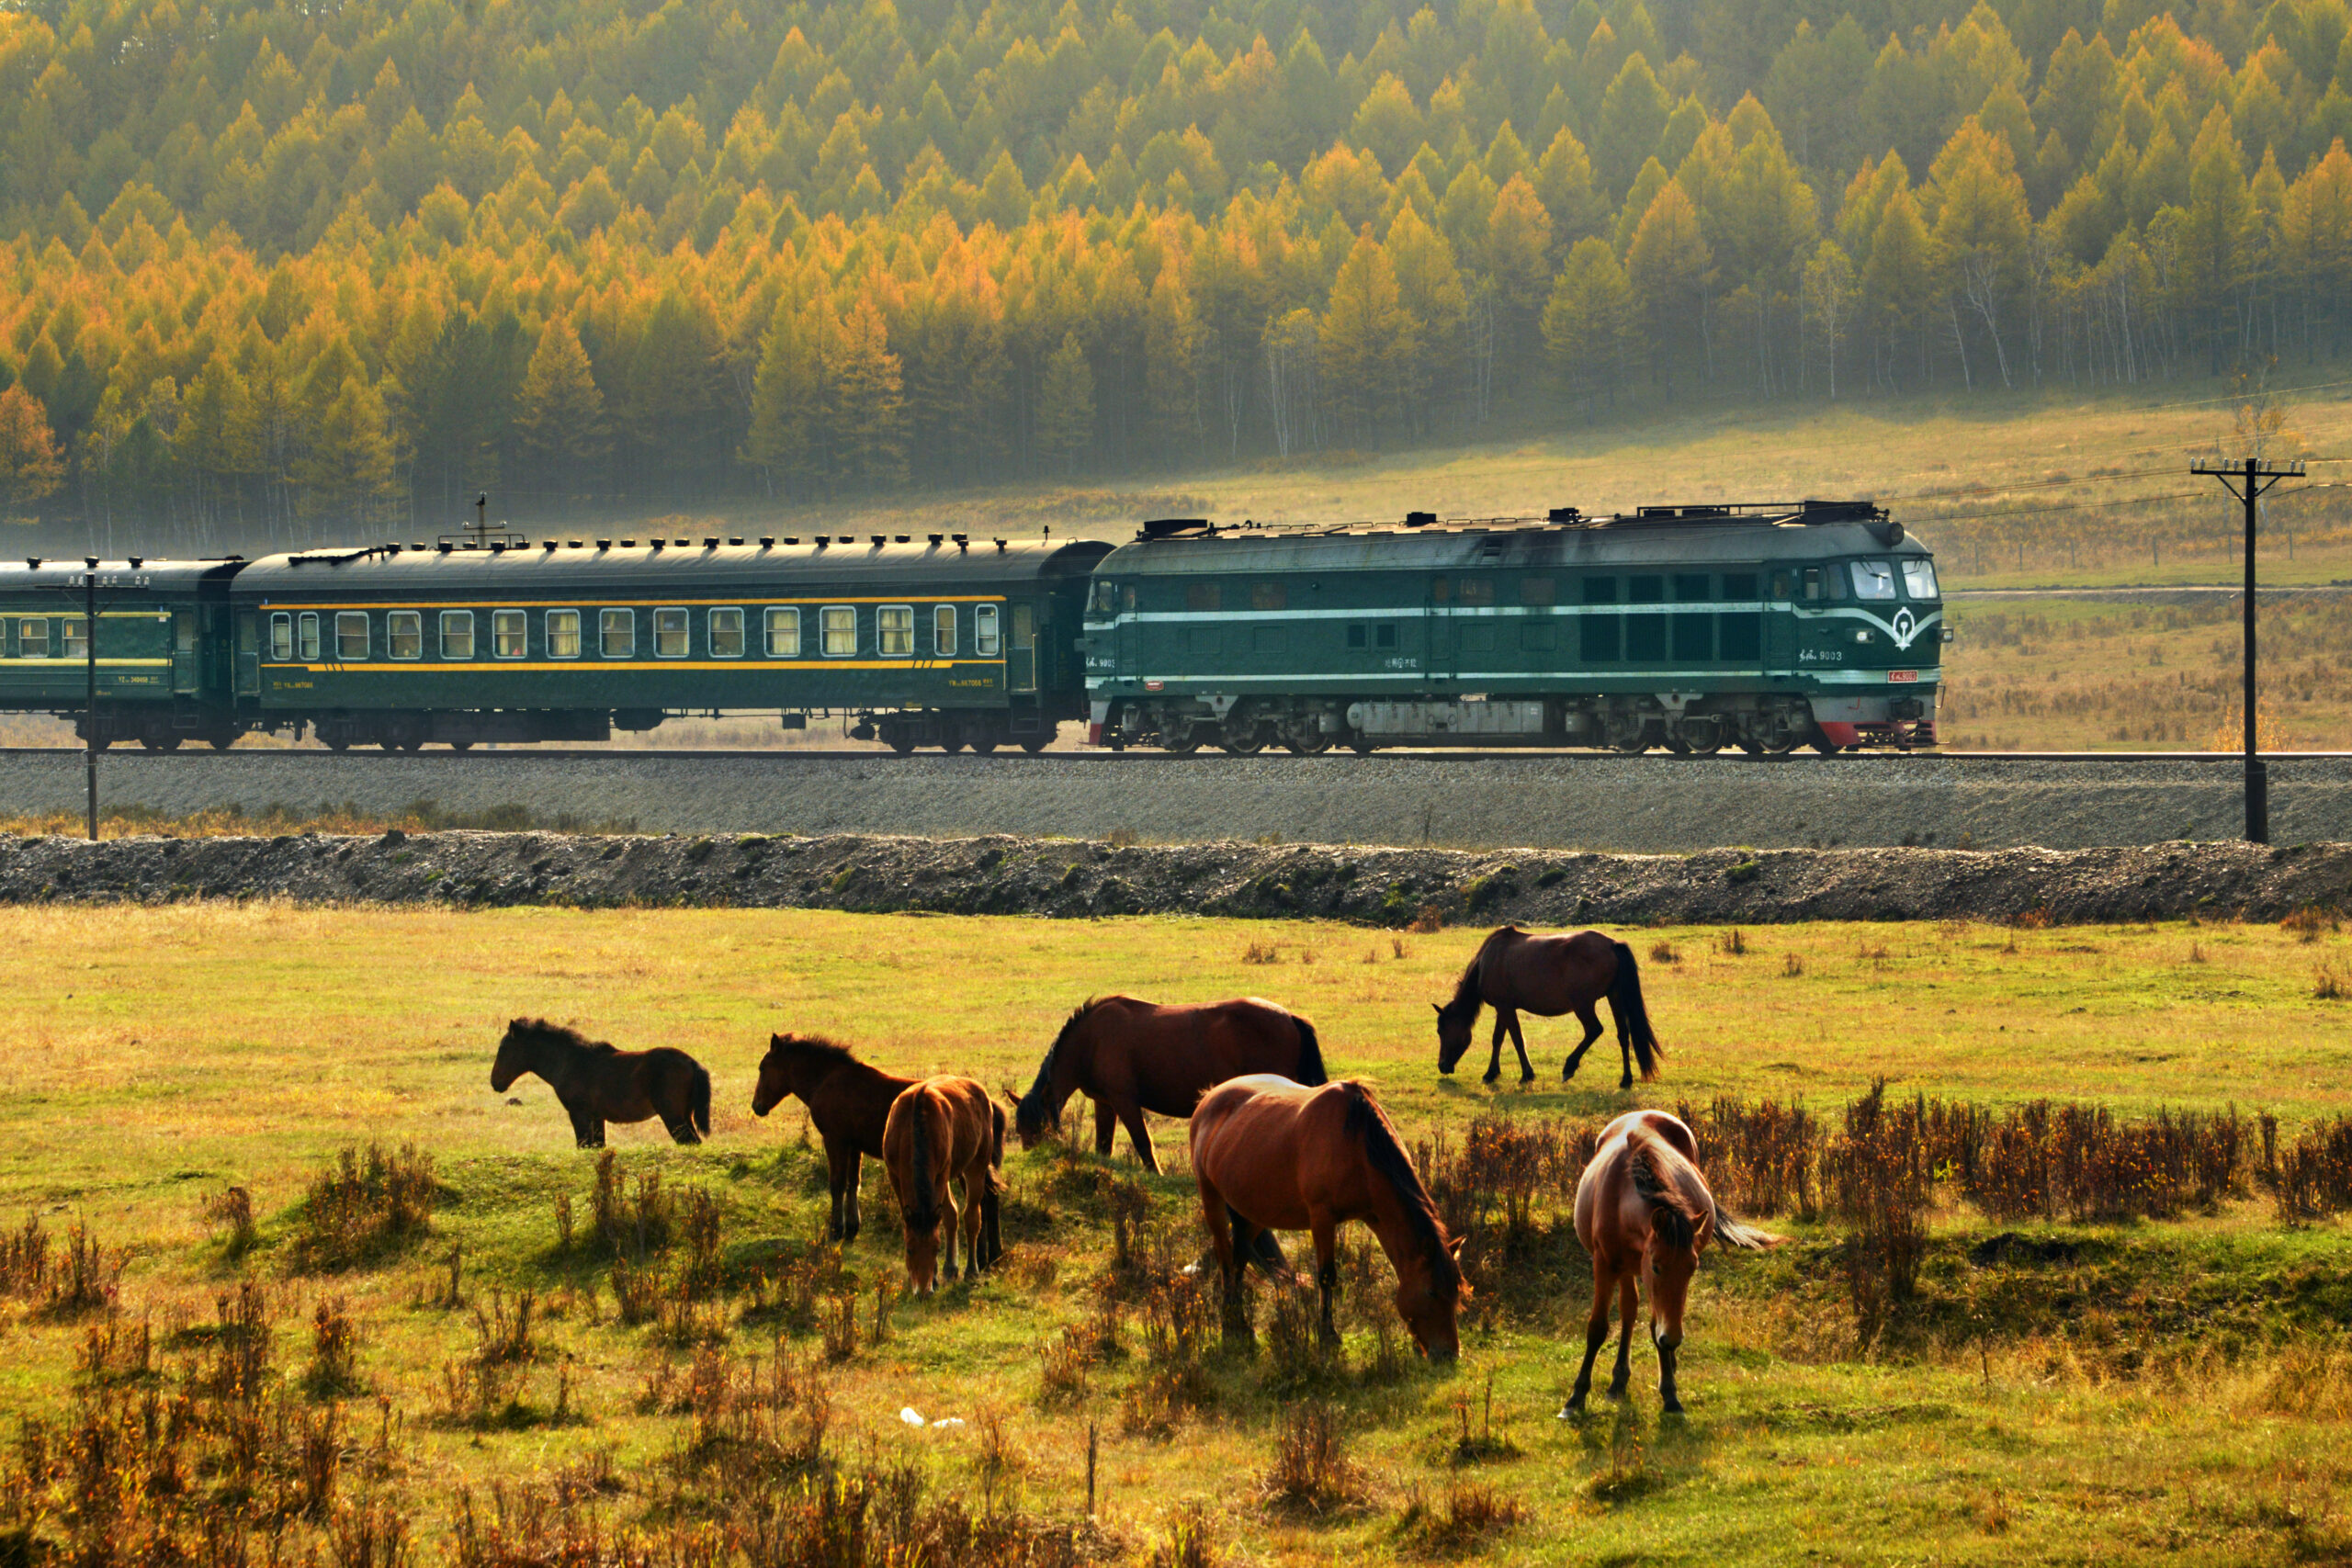 Passenger train passing by a group of horses